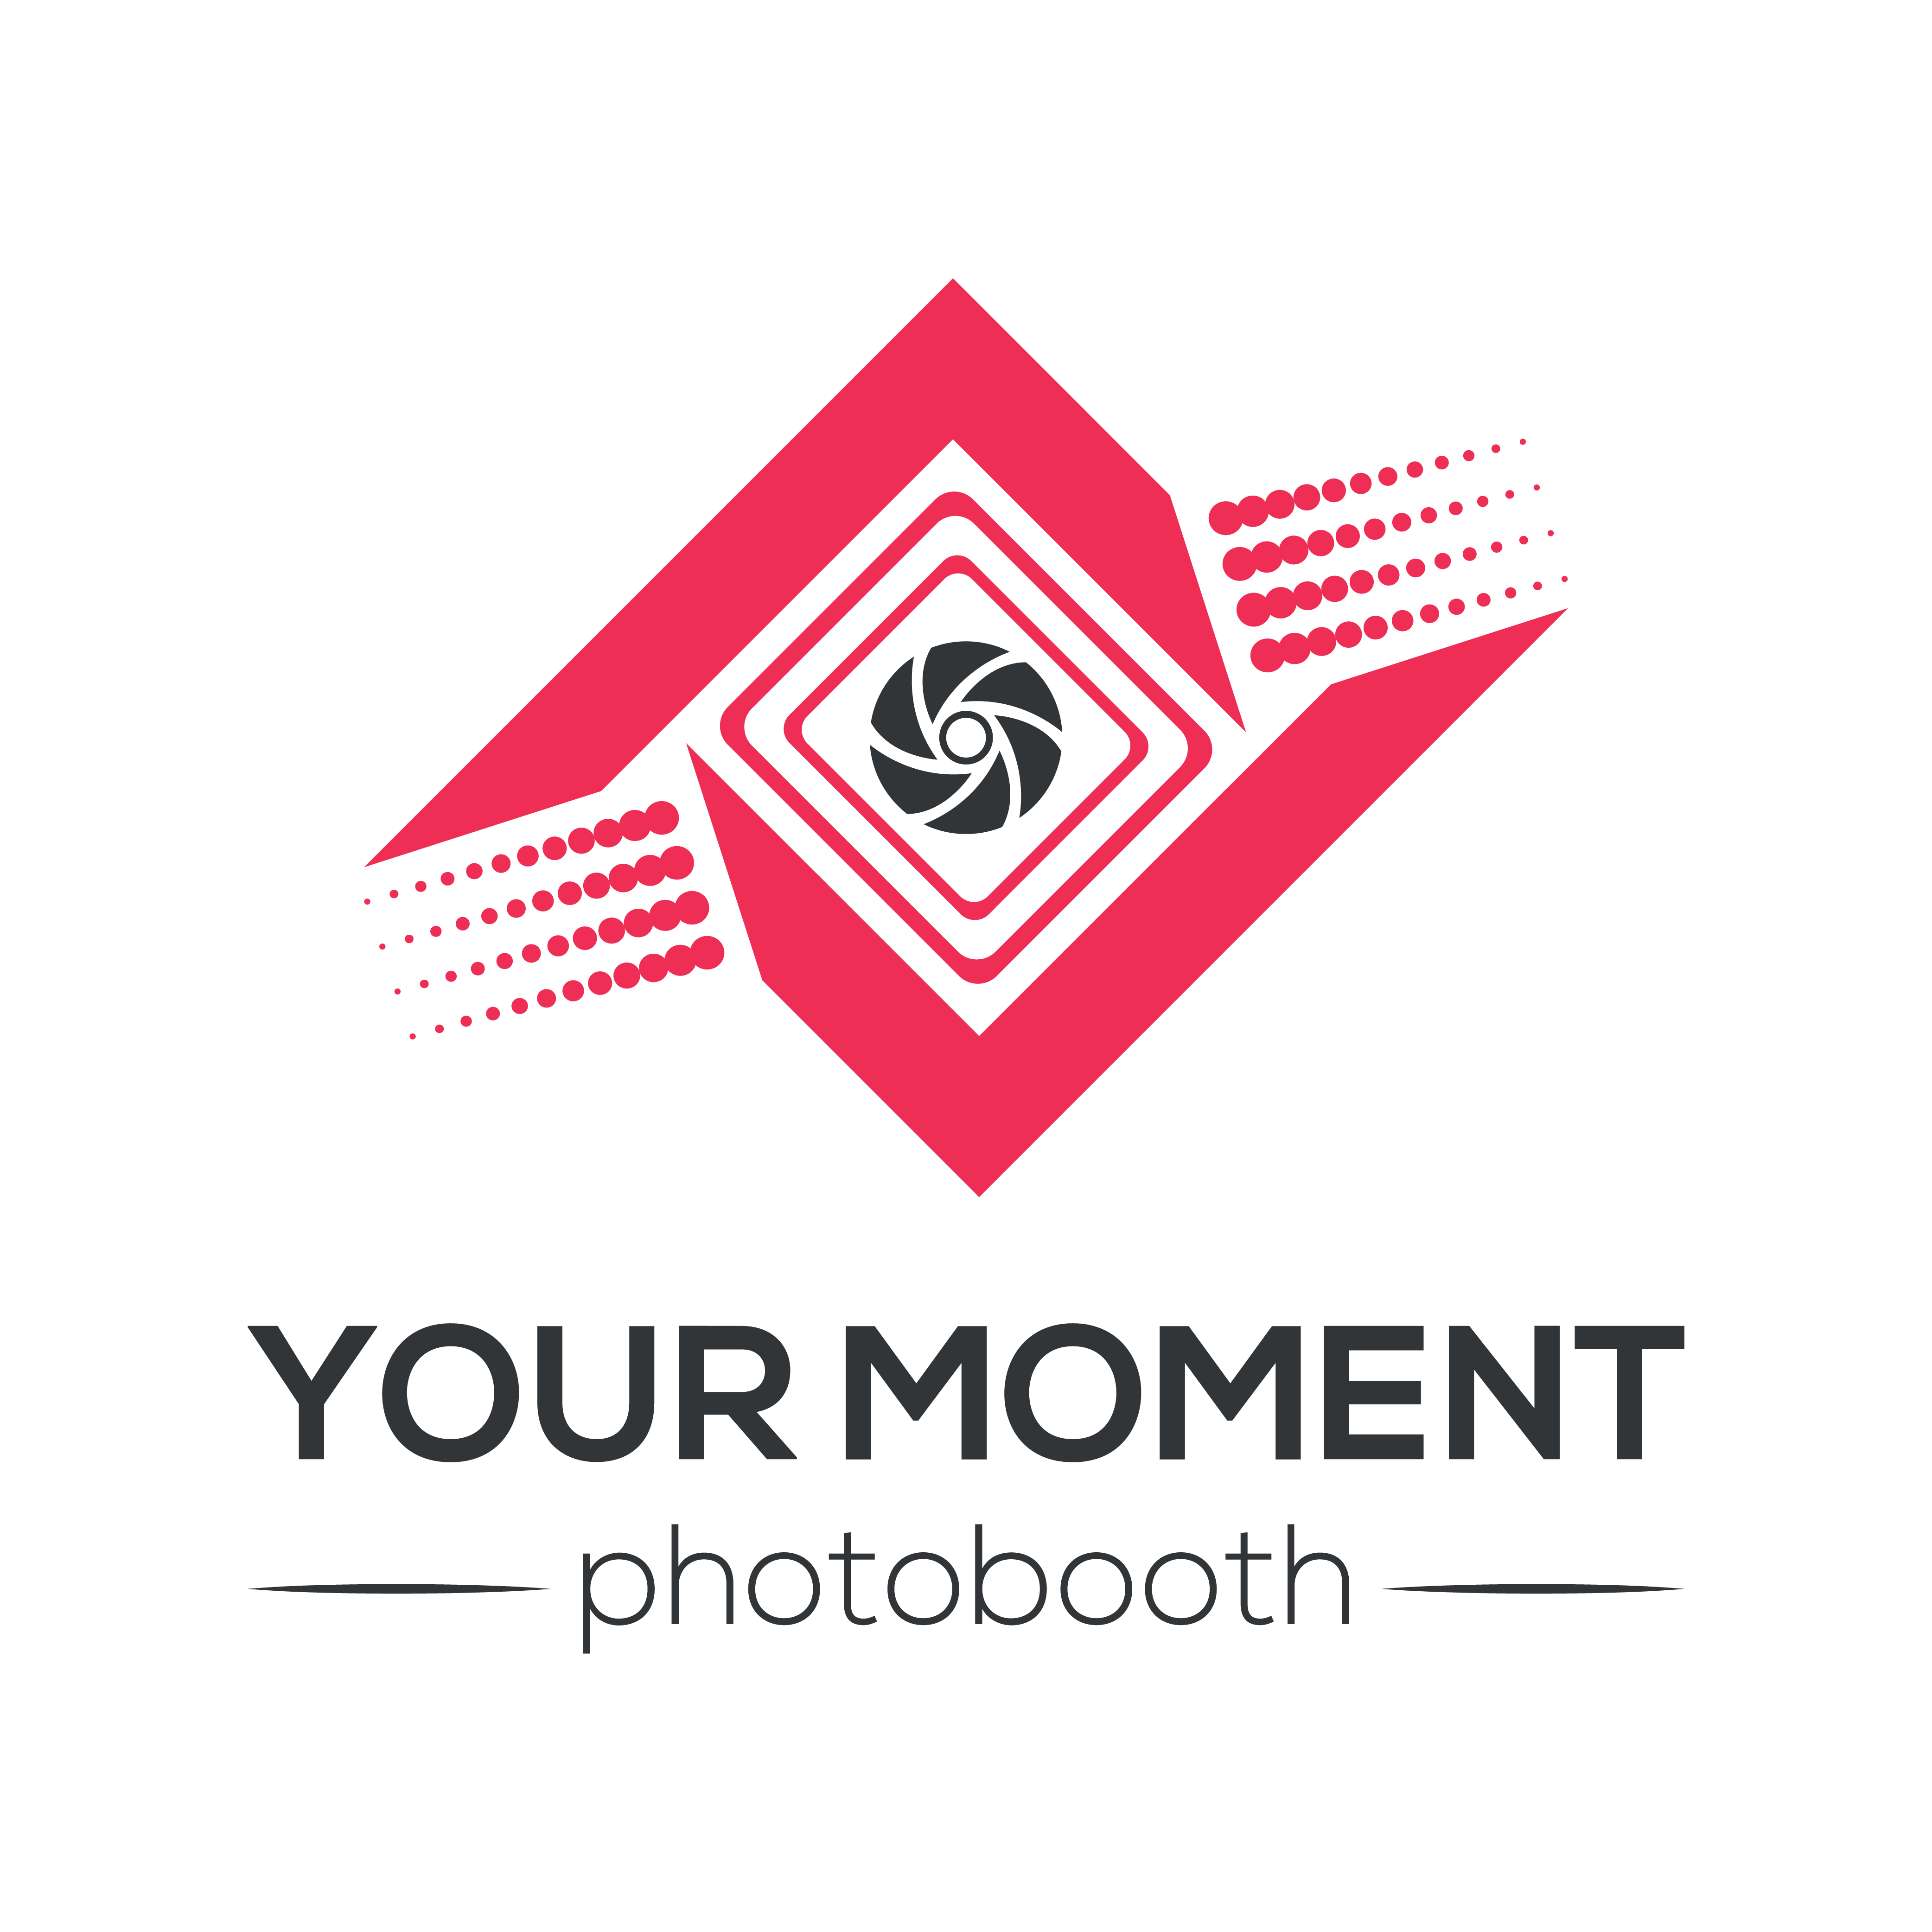 Your Moment Photobooth Logo